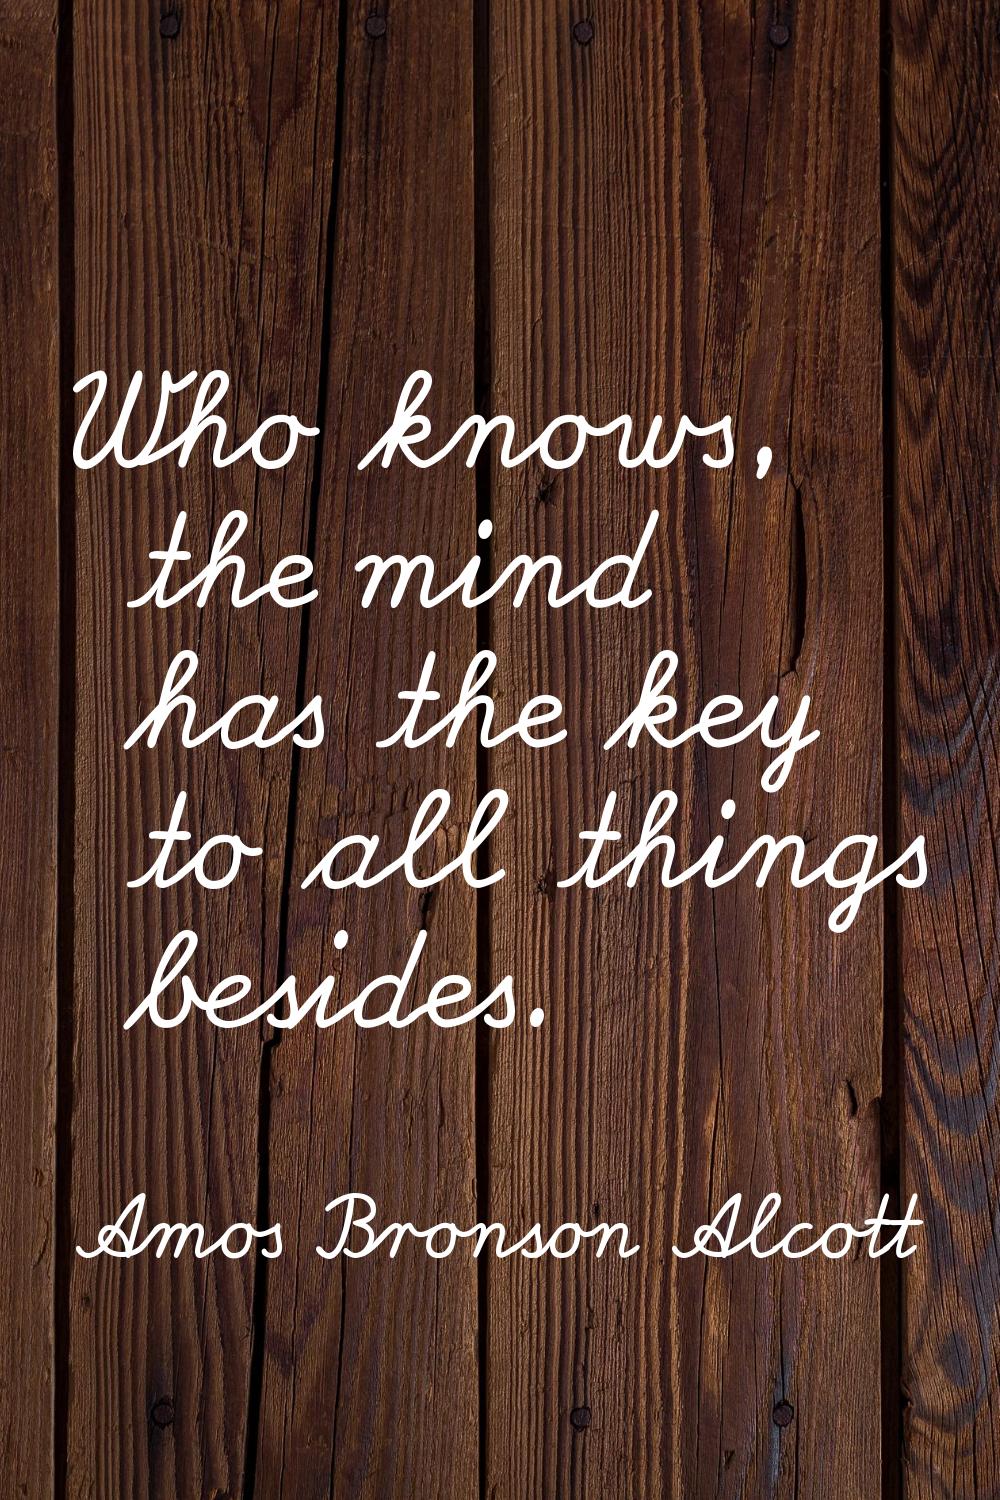 Who knows, the mind has the key to all things besides.